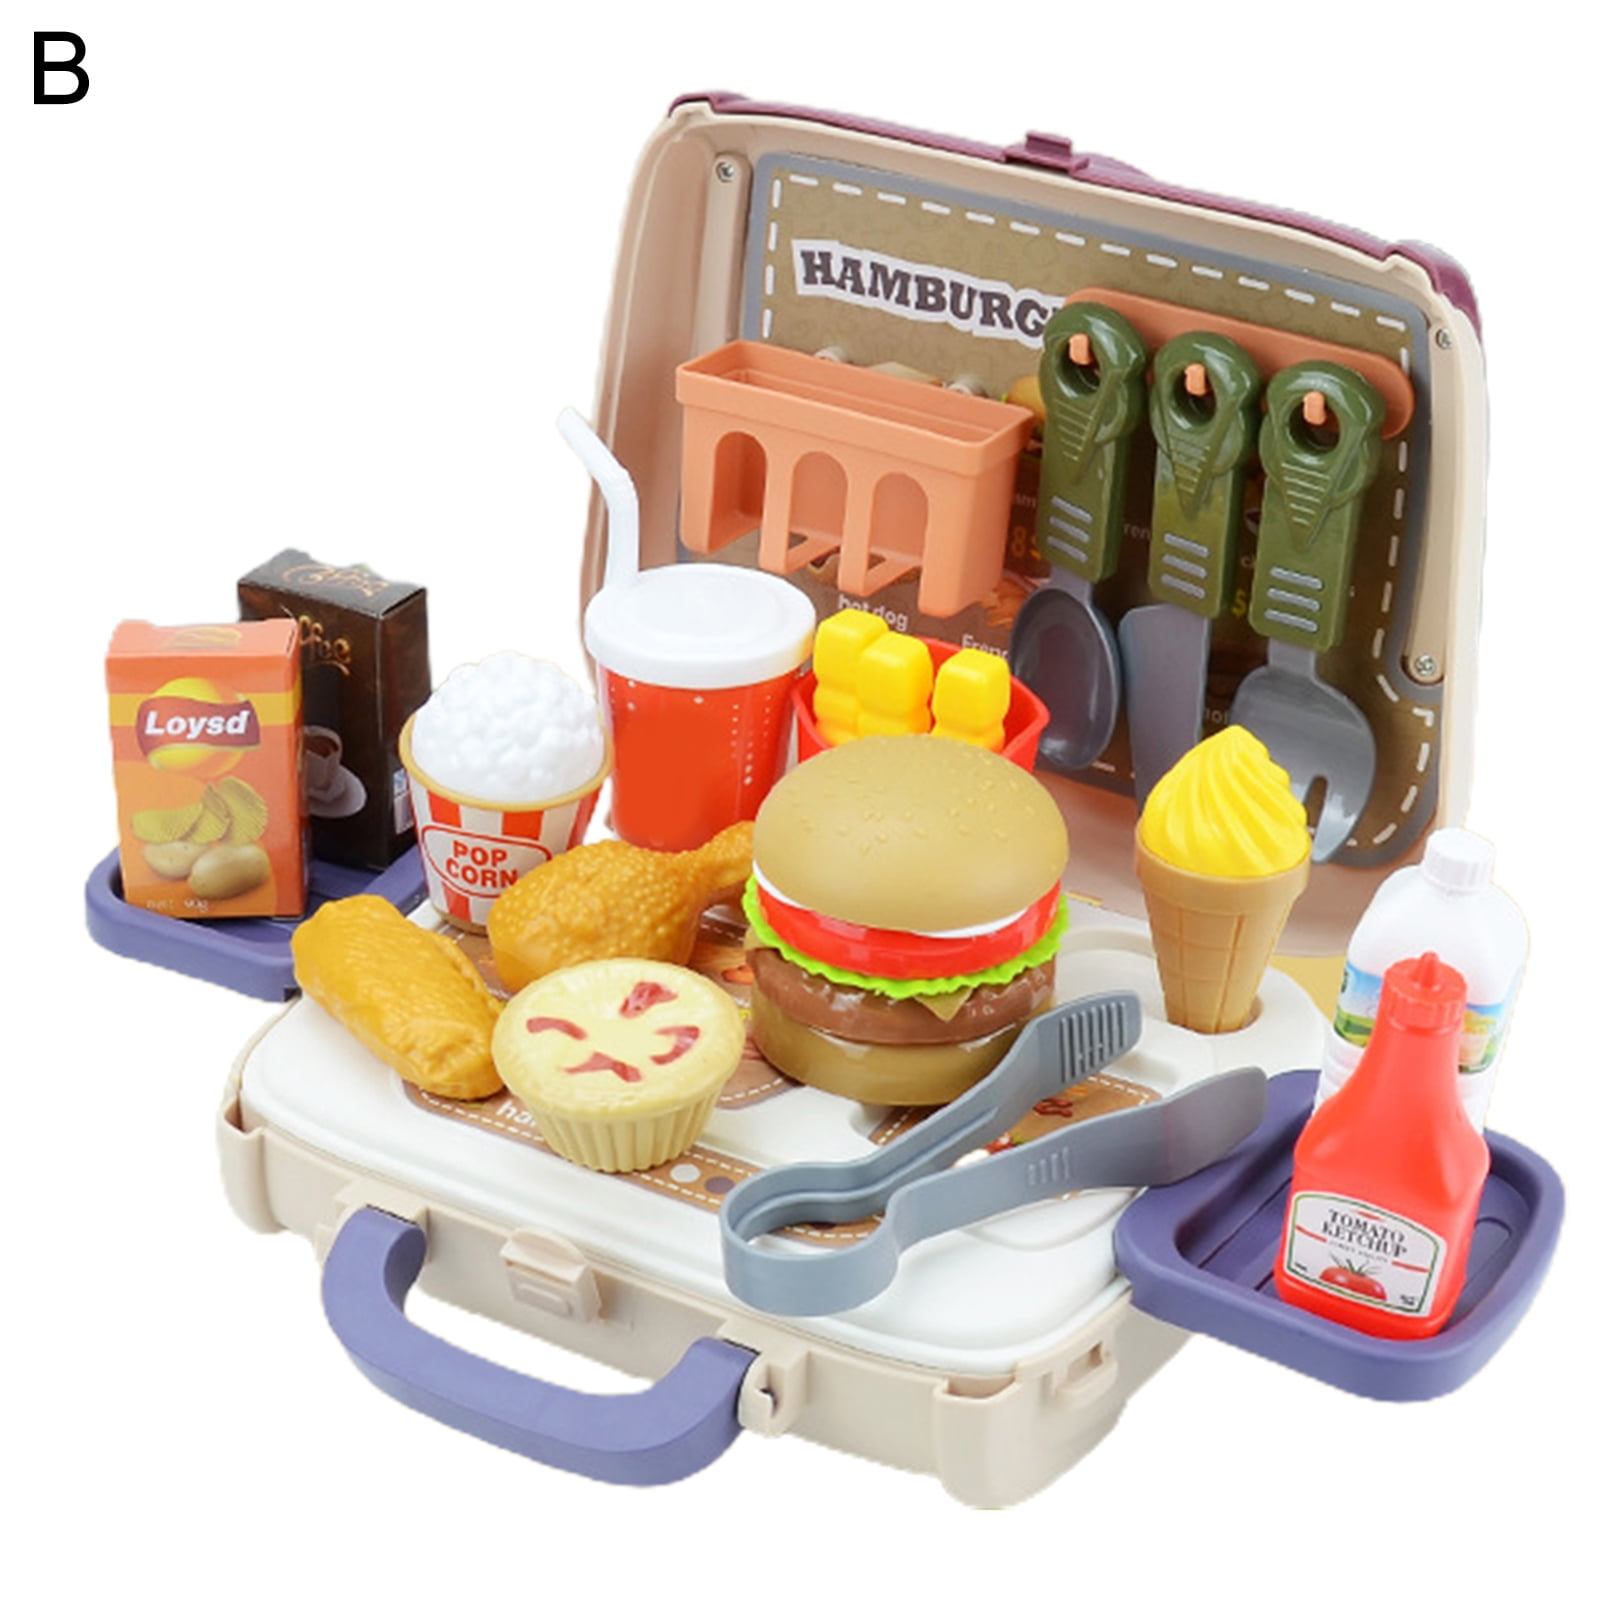 DANTOY DURABLE KIDS CHILDRENS PLAY BREAKFAST SET WITH SAUSAGE & EGG play fry up 